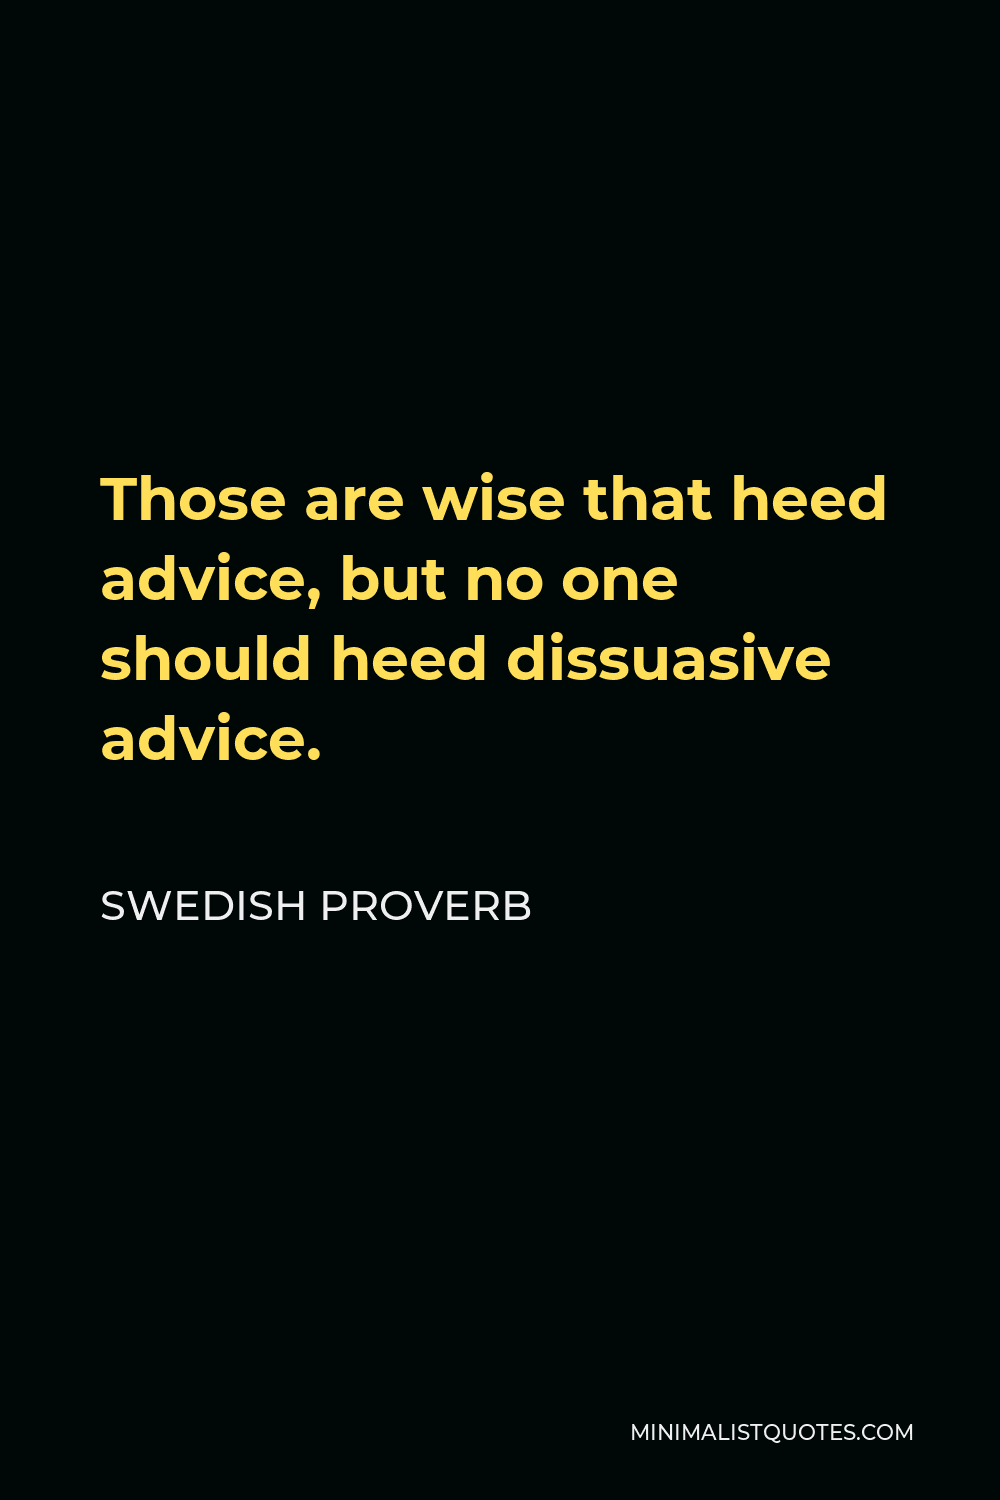 Swedish Proverb Quote - Those are wise that heed advice, but no one should heed dissuasive advice.